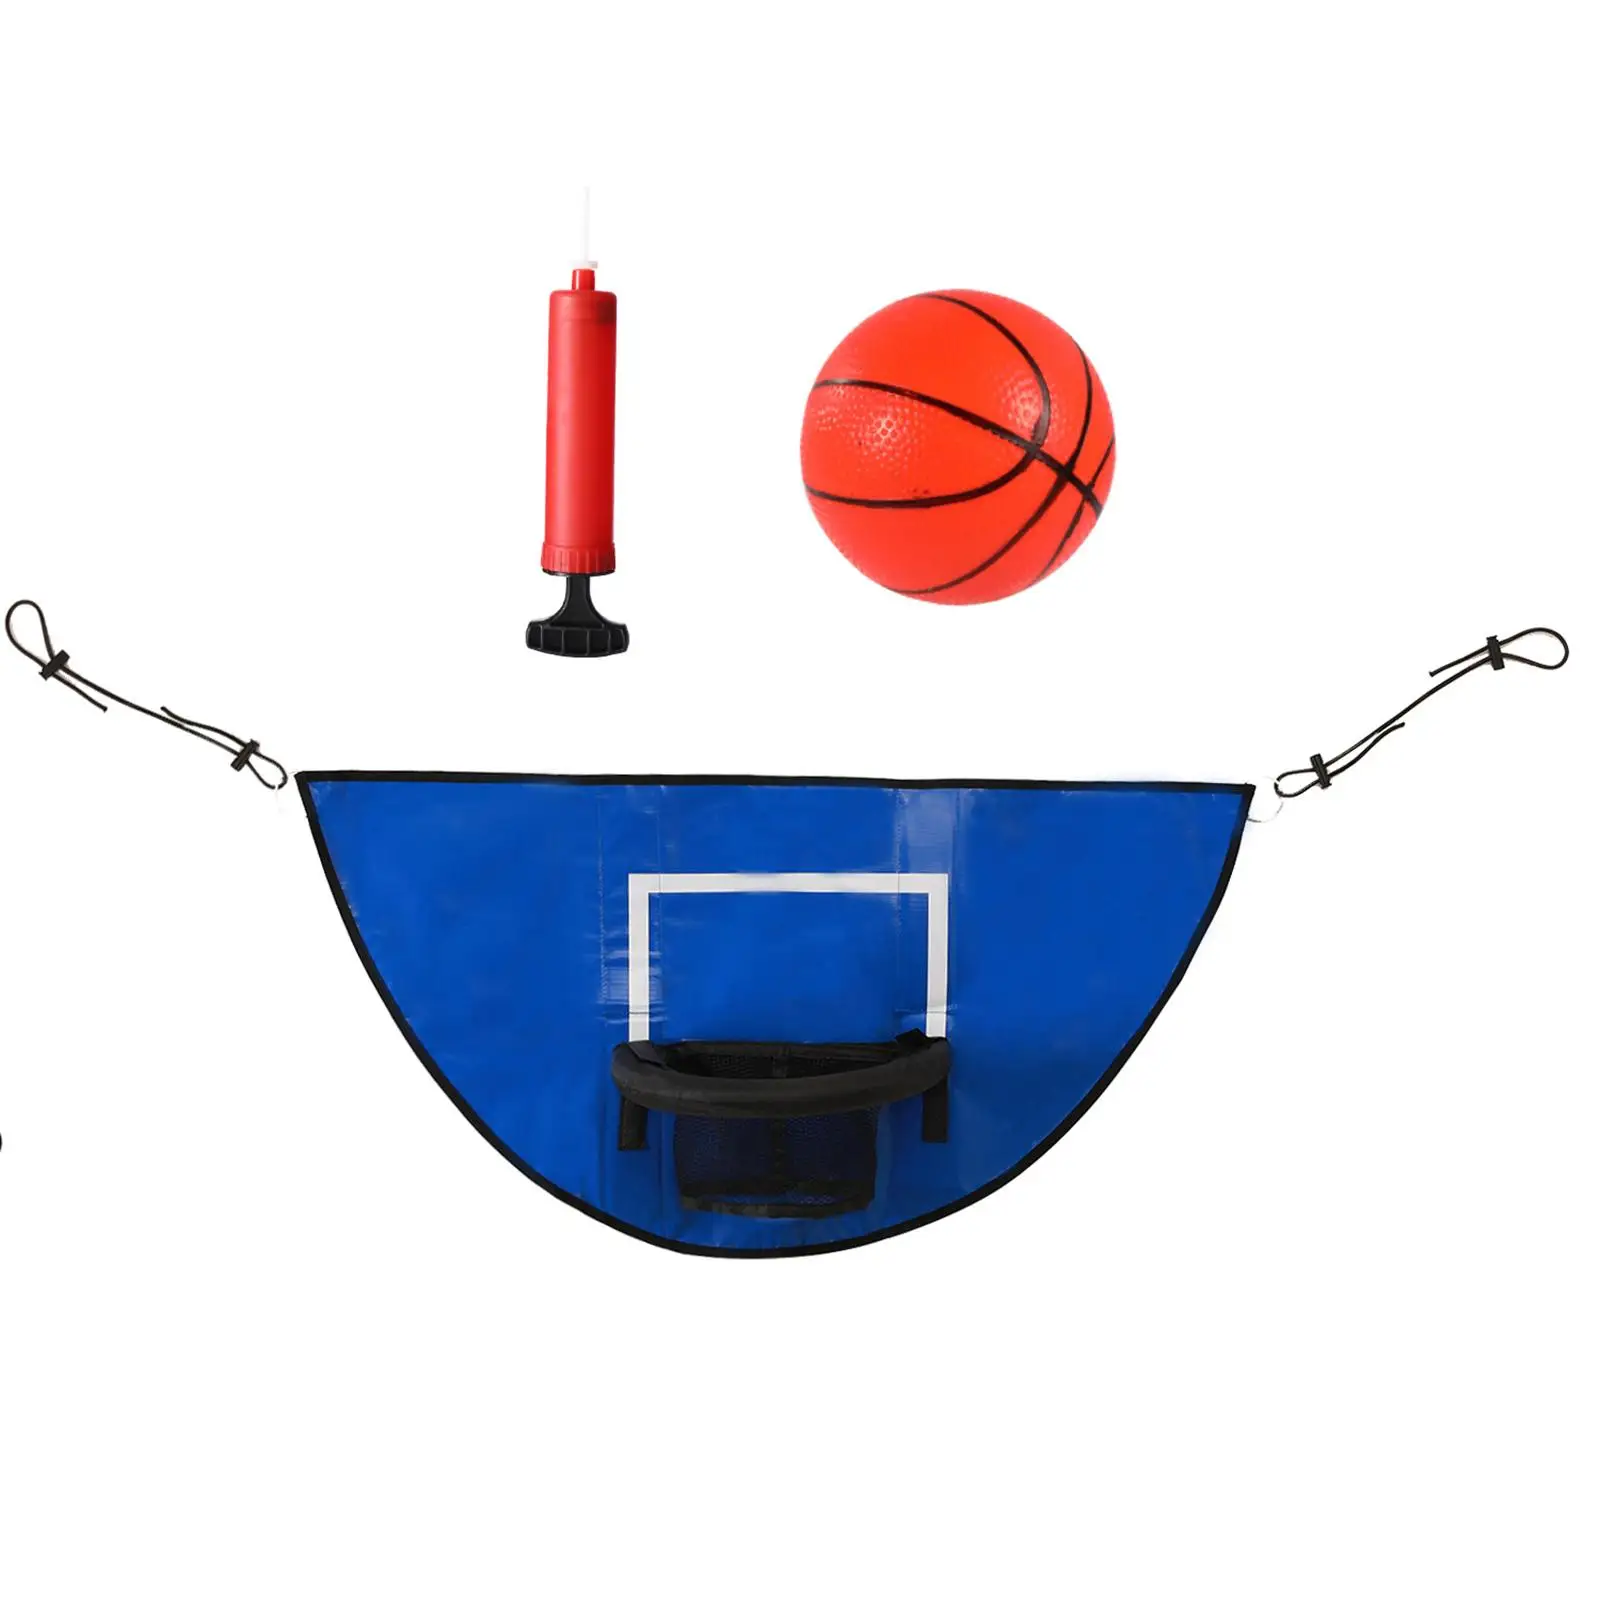 Mini Basketball Hoop for Trampoline with Enclosure Basketball Stand Outdoor